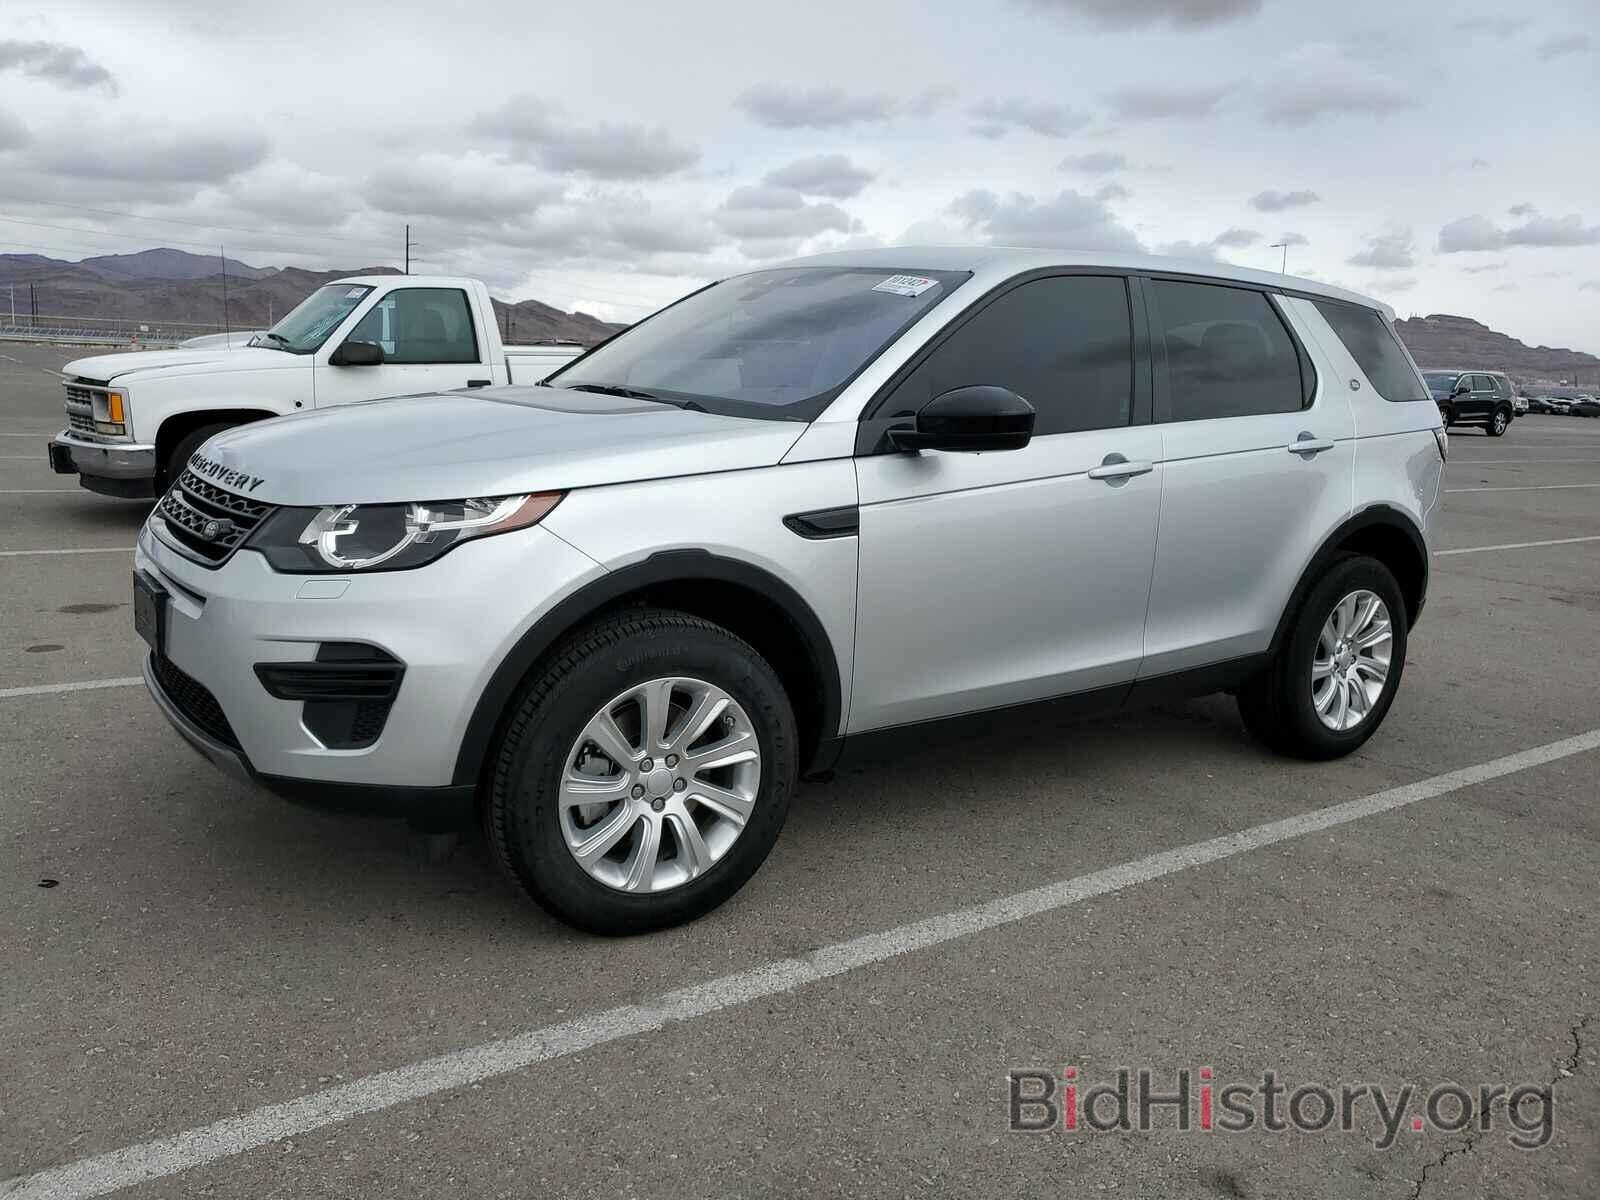 Фотография SALCP2RX0JH758453 - Land Rover Discovery Sport 2018